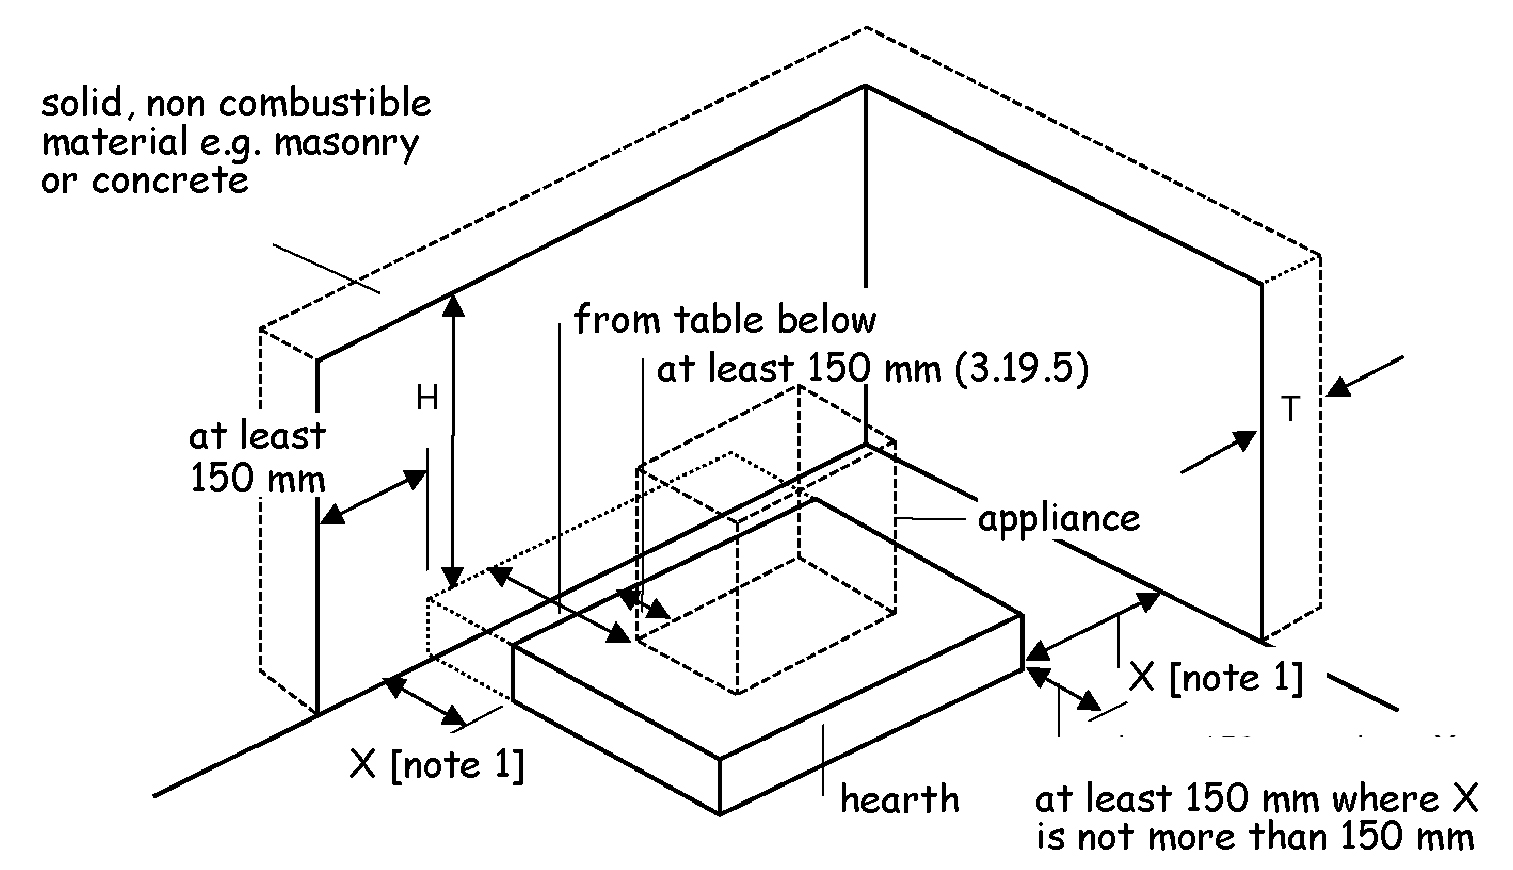 Relationship of hearths to combustible material